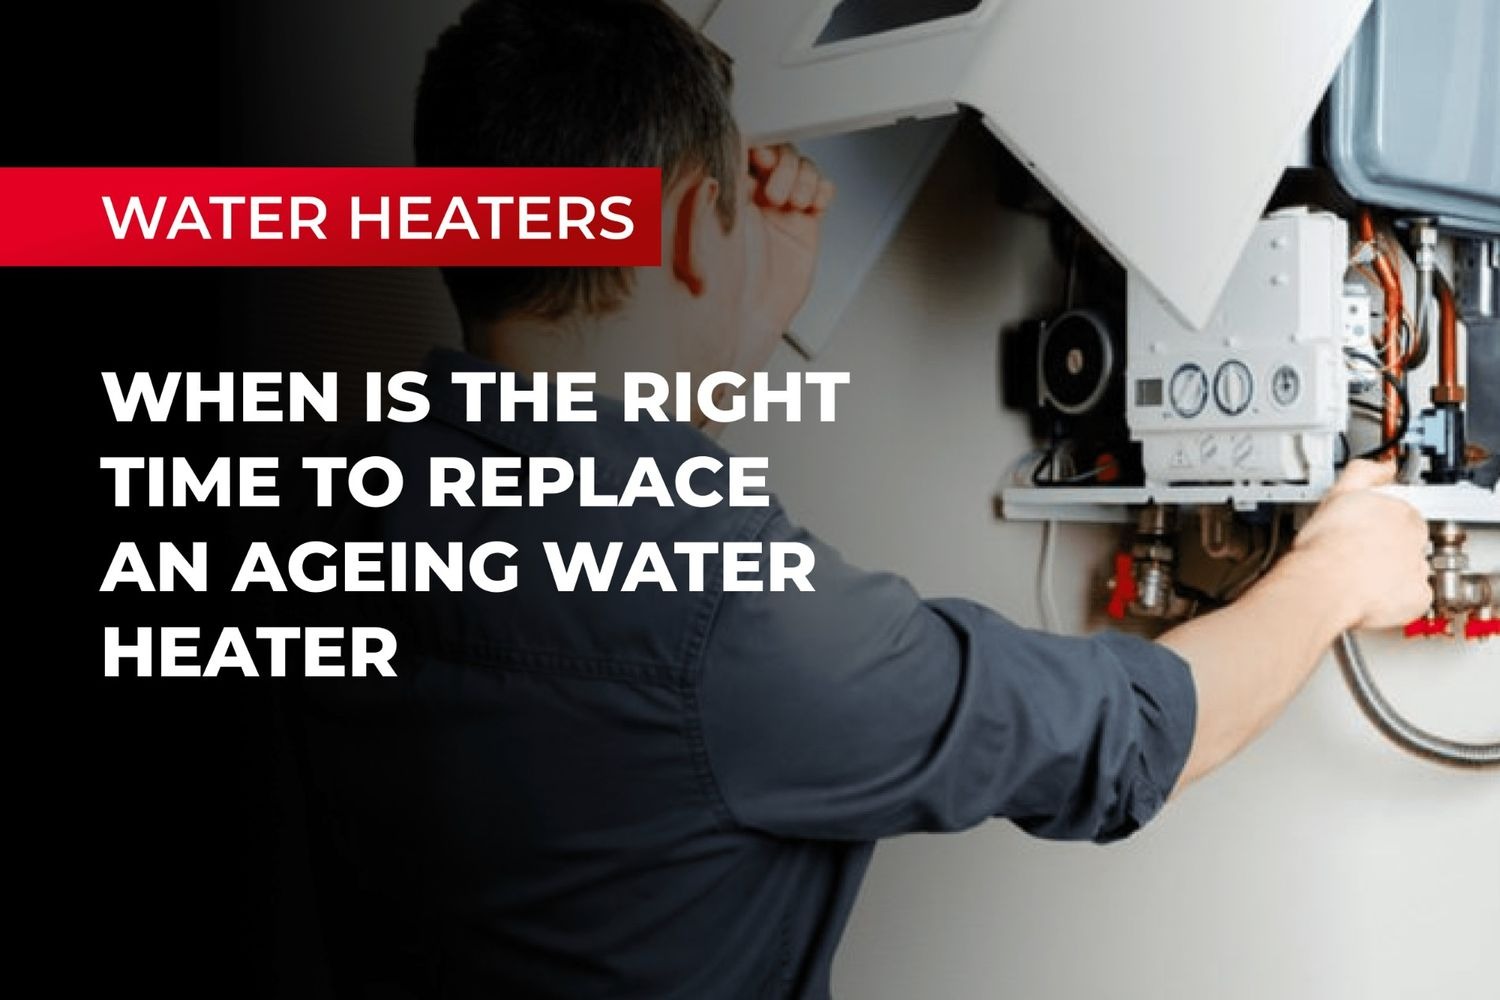 When is the Right Time to Replace an Aging Water Heater?